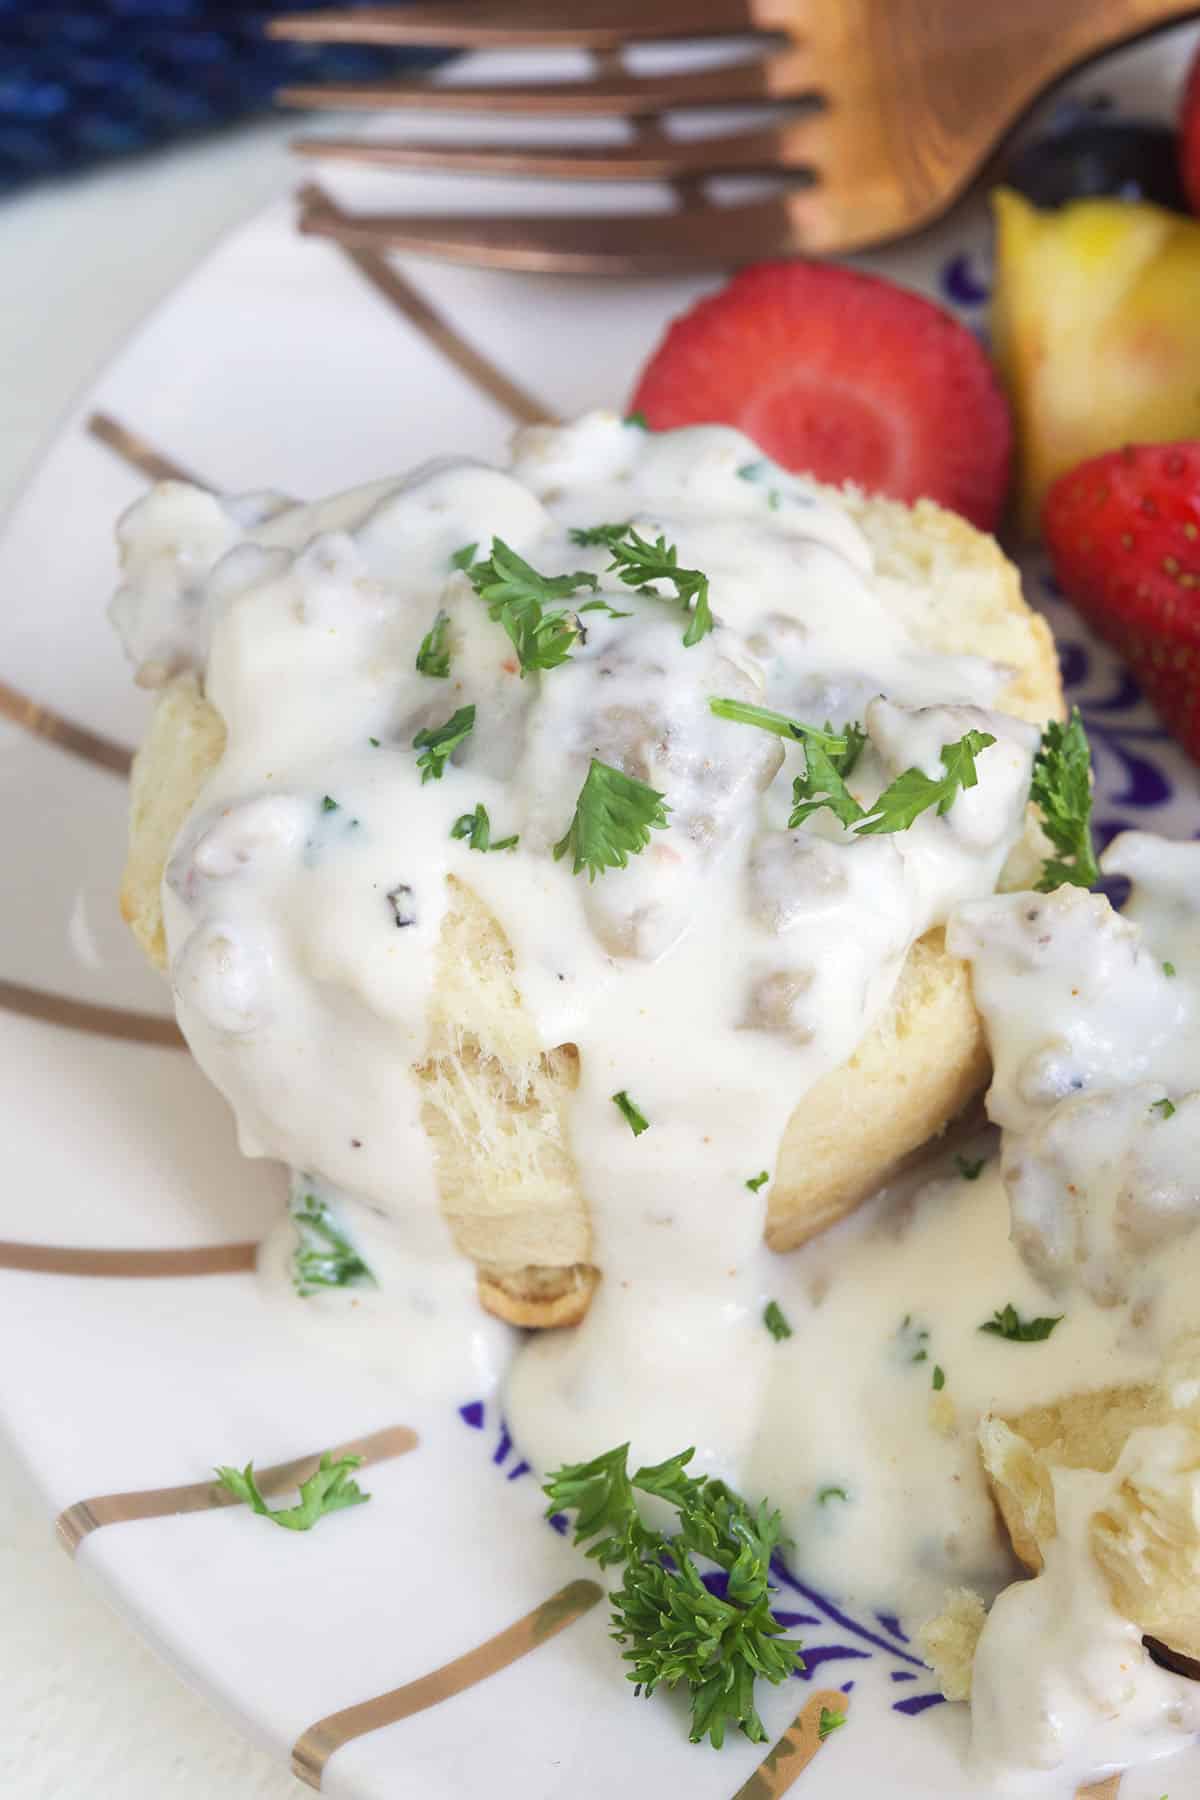 Sausage gravy is placed on a cooked biscuit.